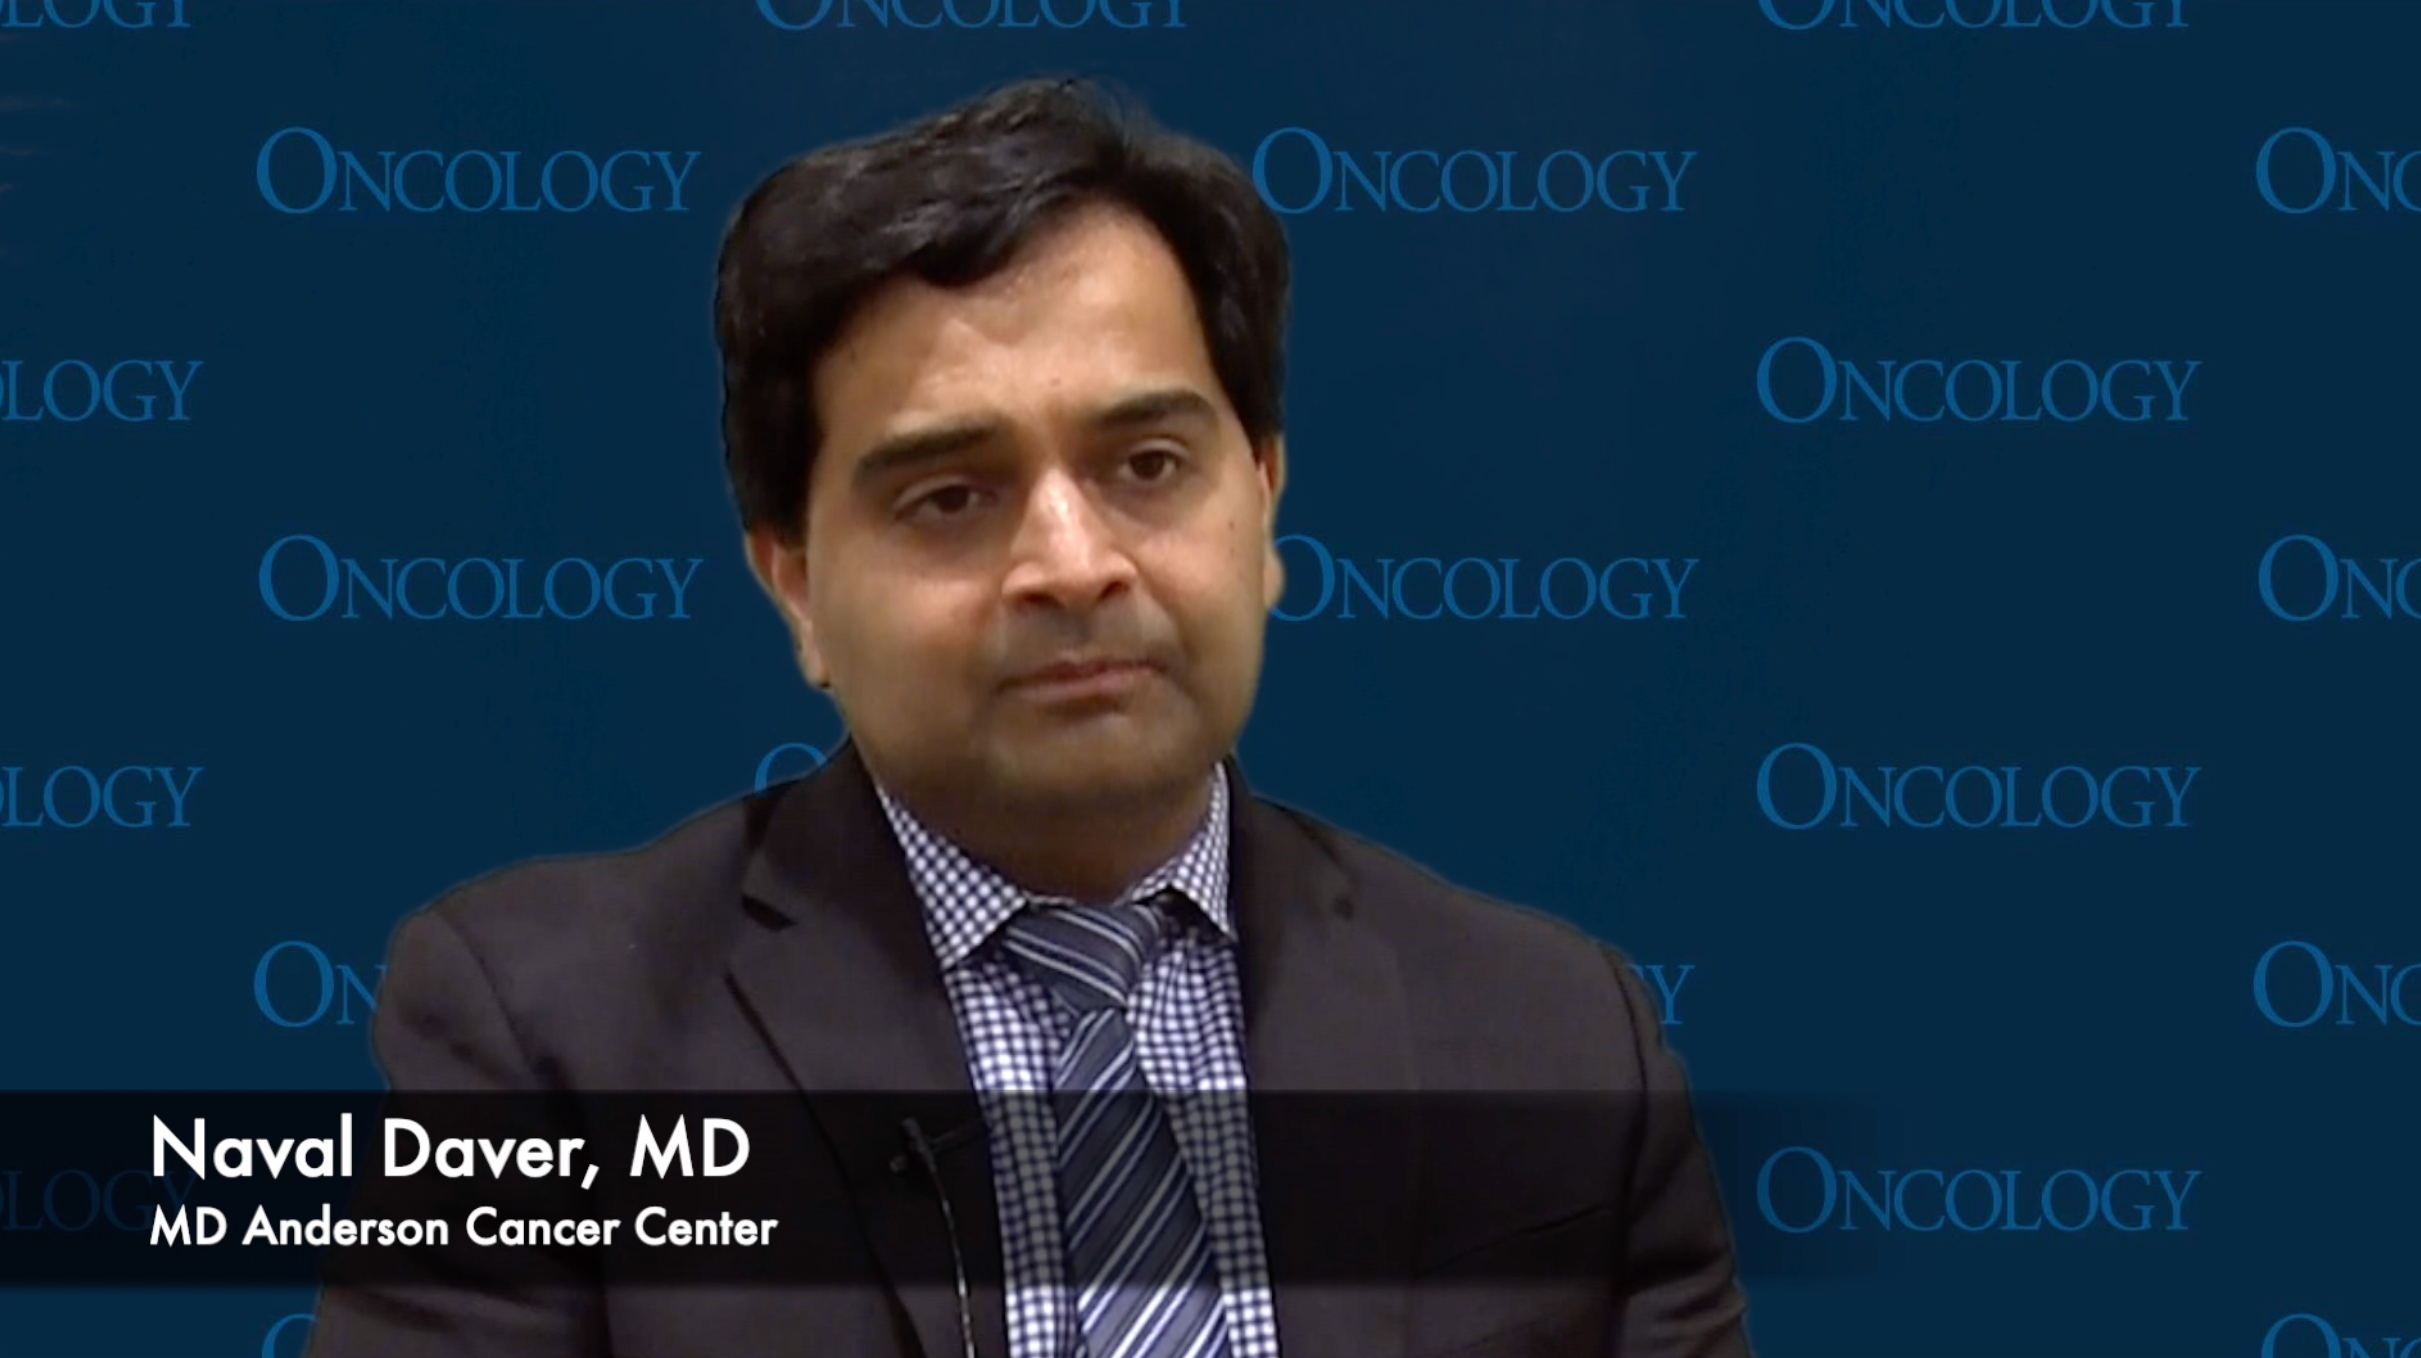 Naval Daver, MD, Provides Perspective on Updates in Acute Myeloid Leukemia